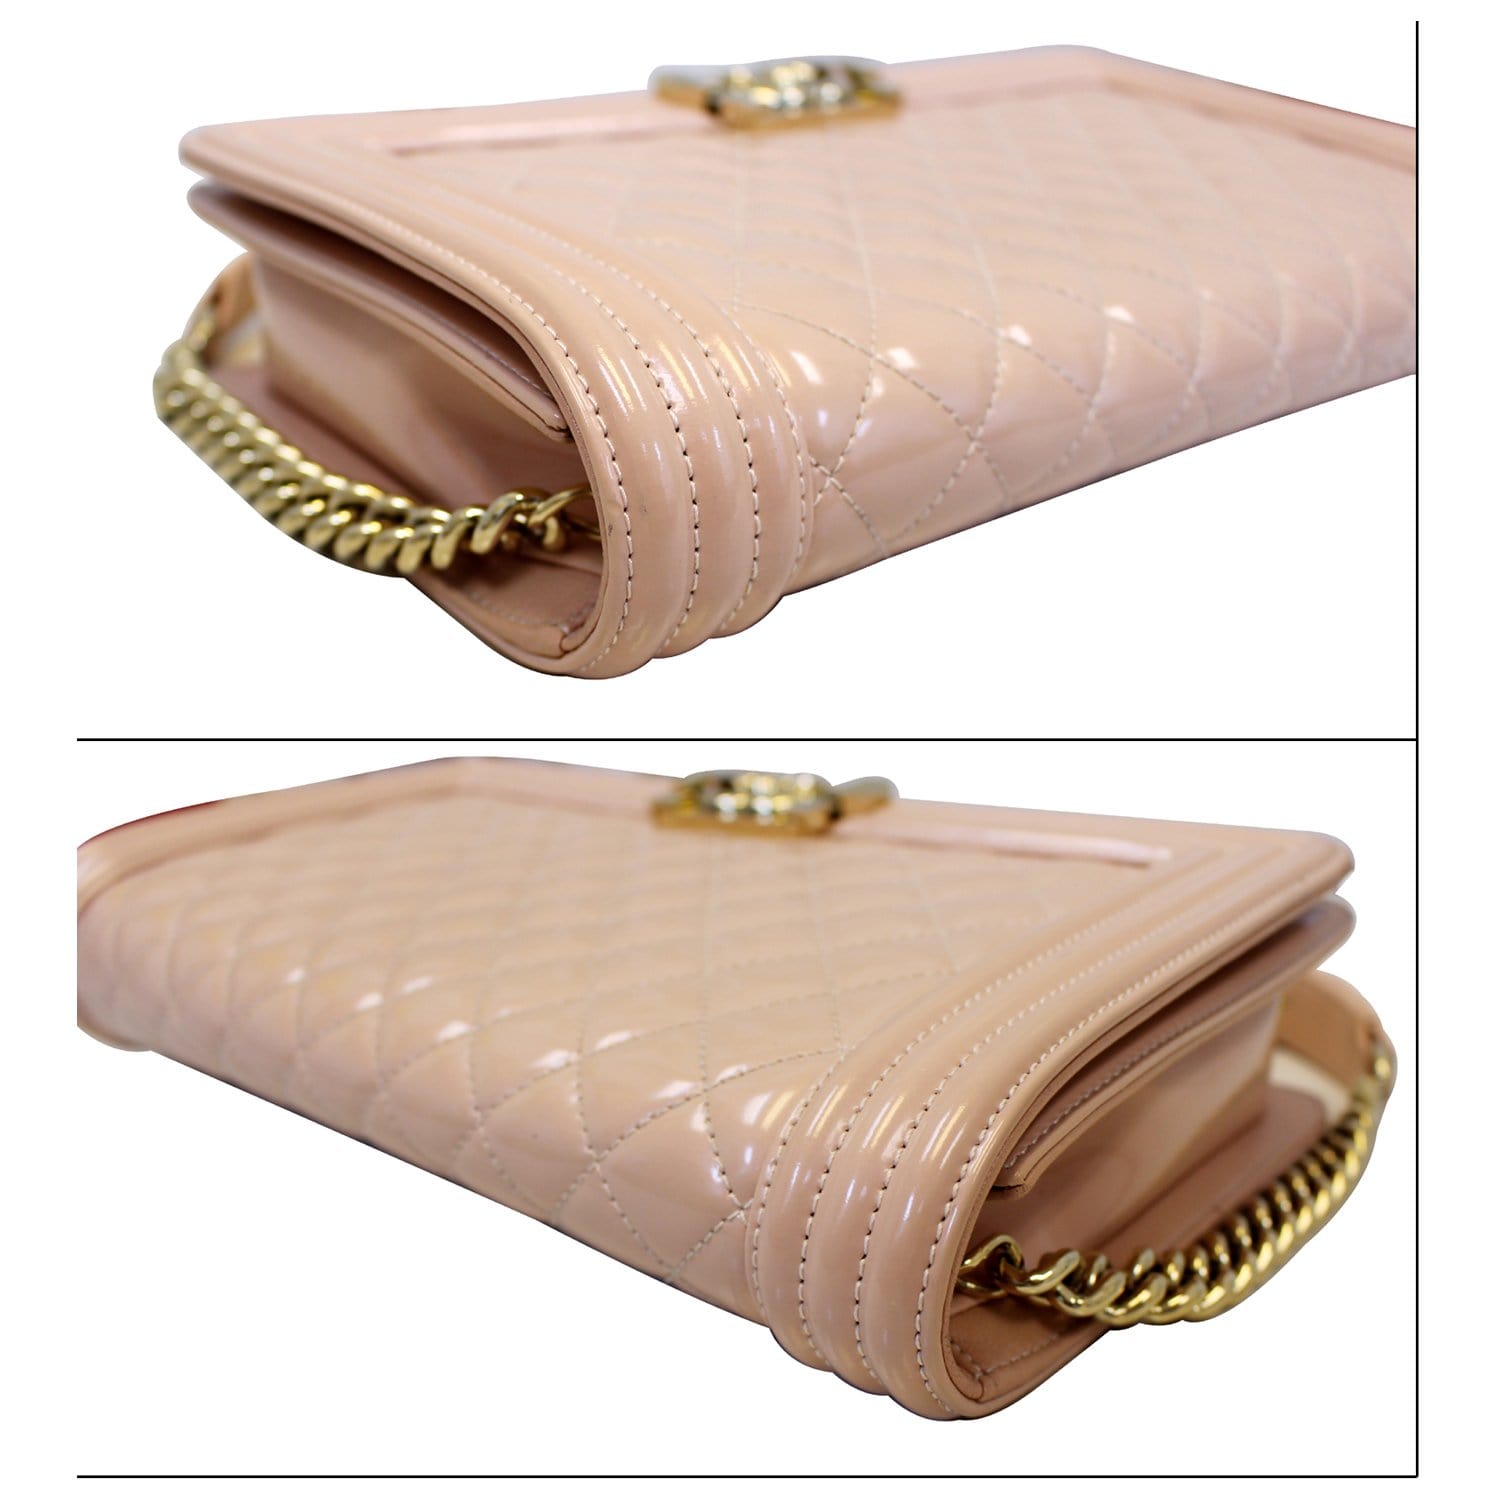 chanel clutch with chain pink